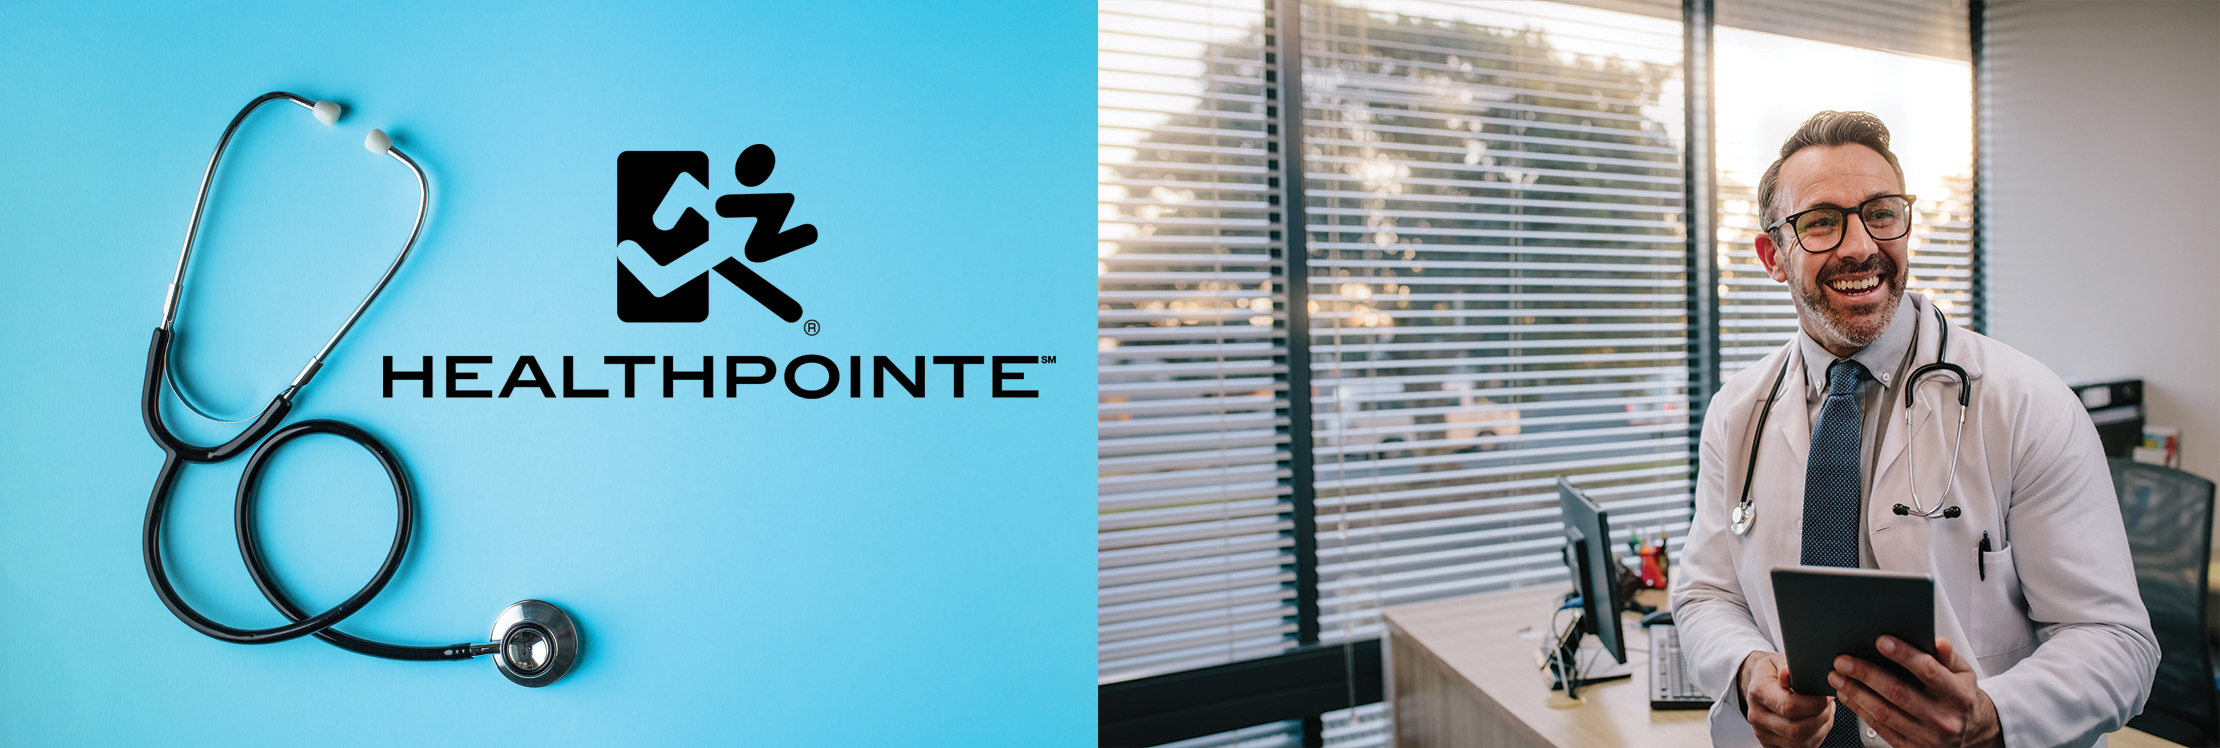 Healthpointe reviews | 5345 Irwindale Ave - Irwindale CA